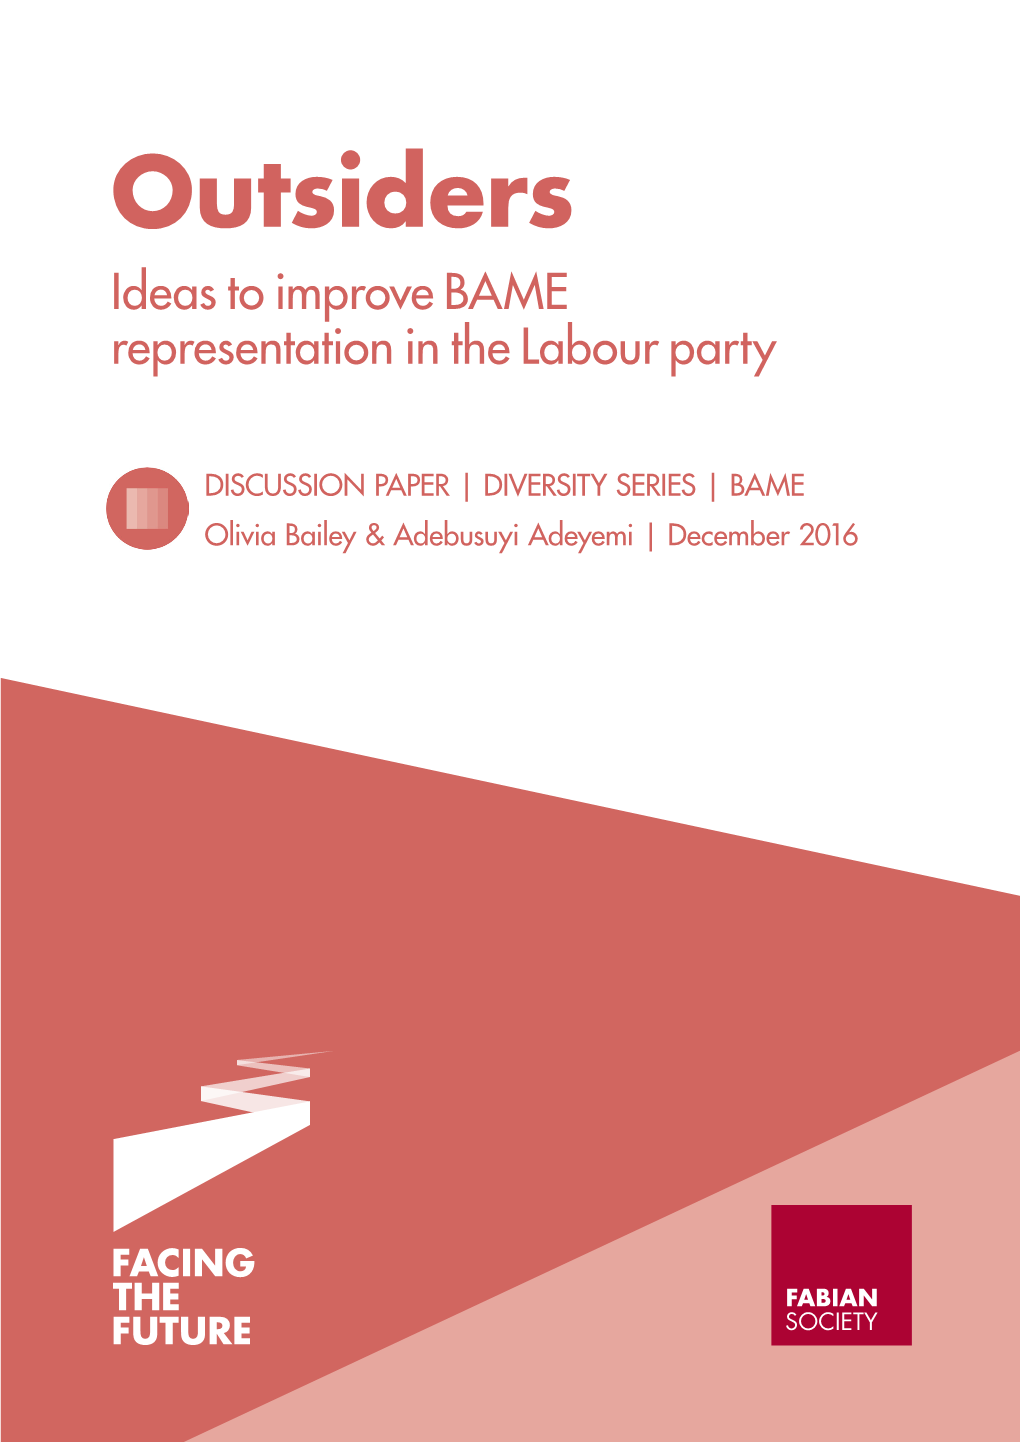 Outsiders Ideas to Improve BAME Representation in the Labour Party